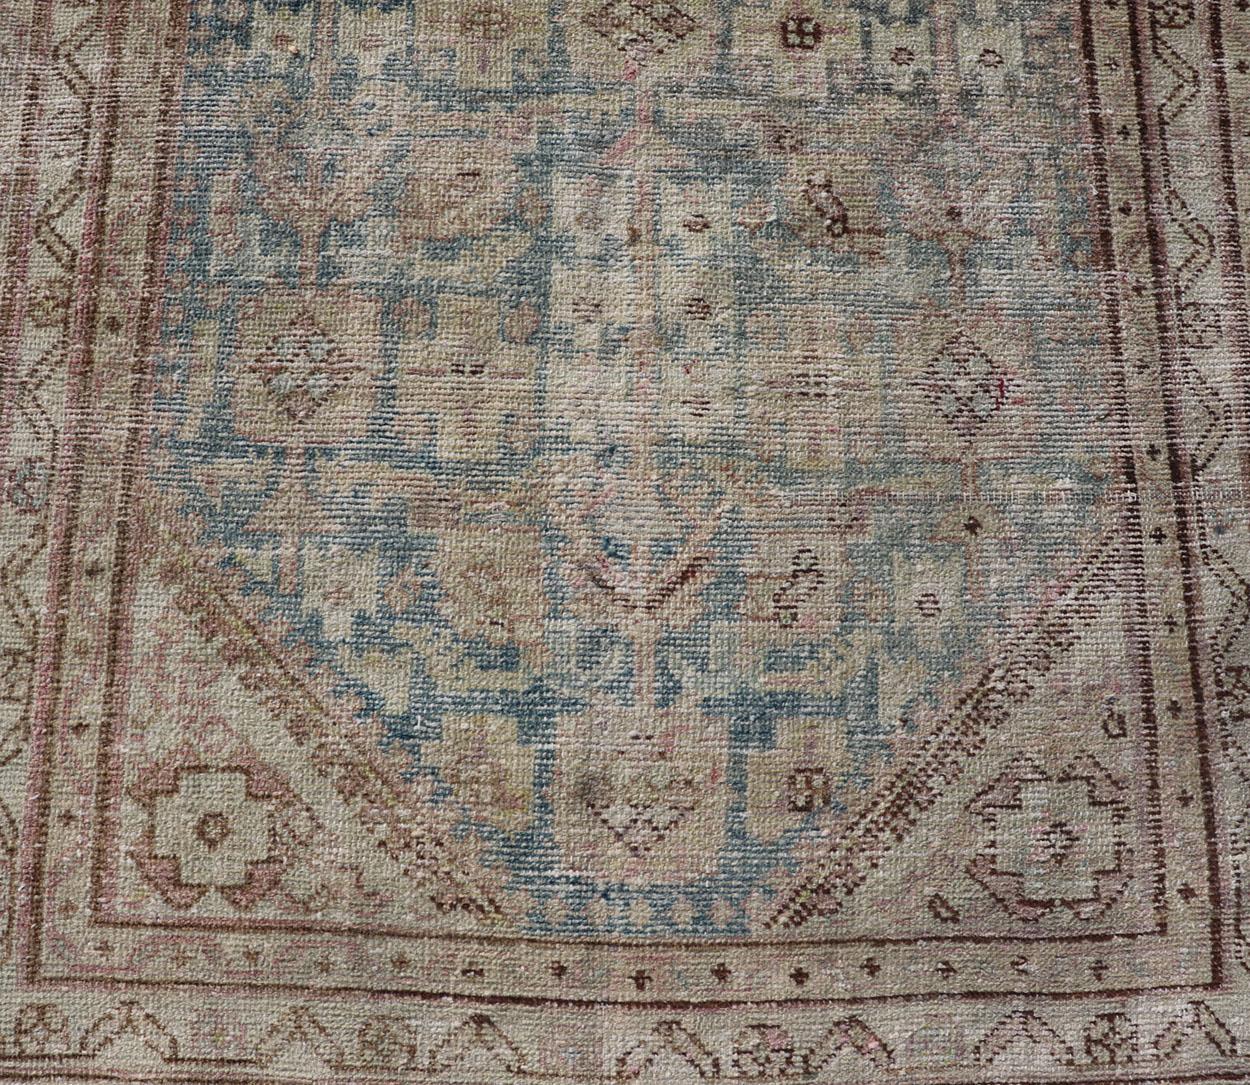 20th Century Antique Persian Hamedan Runner with Sub-Geometric Design in Blues and Neutrals  For Sale